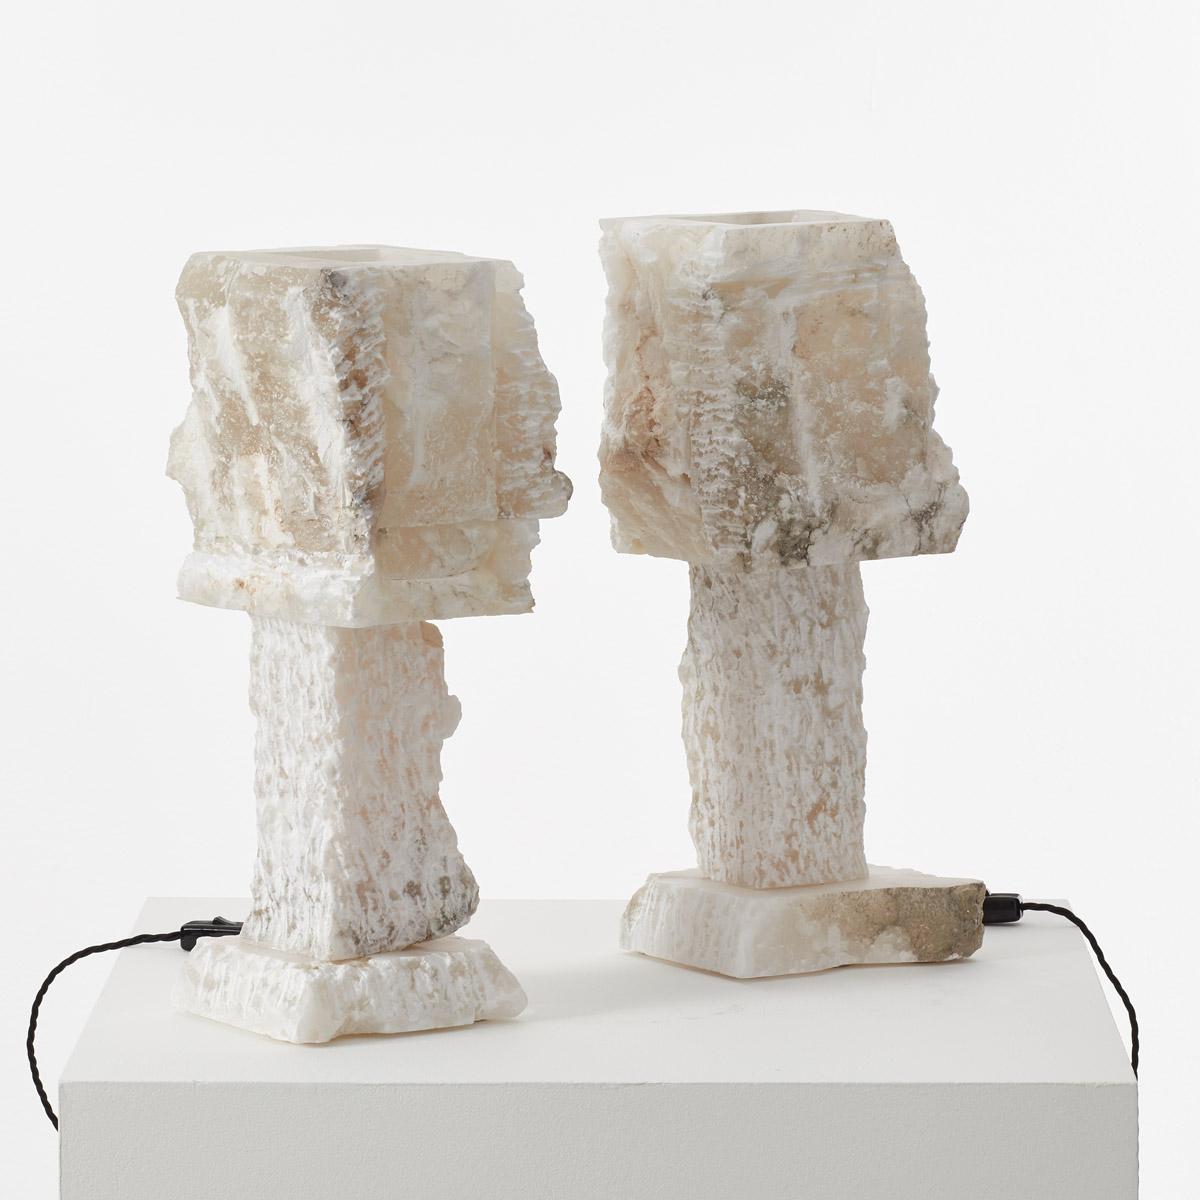 This pair of large rough-hewn alabaster table lamps has a great presence. The surfaces are made from thick slabs of alabaster stone with rough-cut edges and chisel marks. Alabaster is known for its ethereal translucence, allowing light to glow